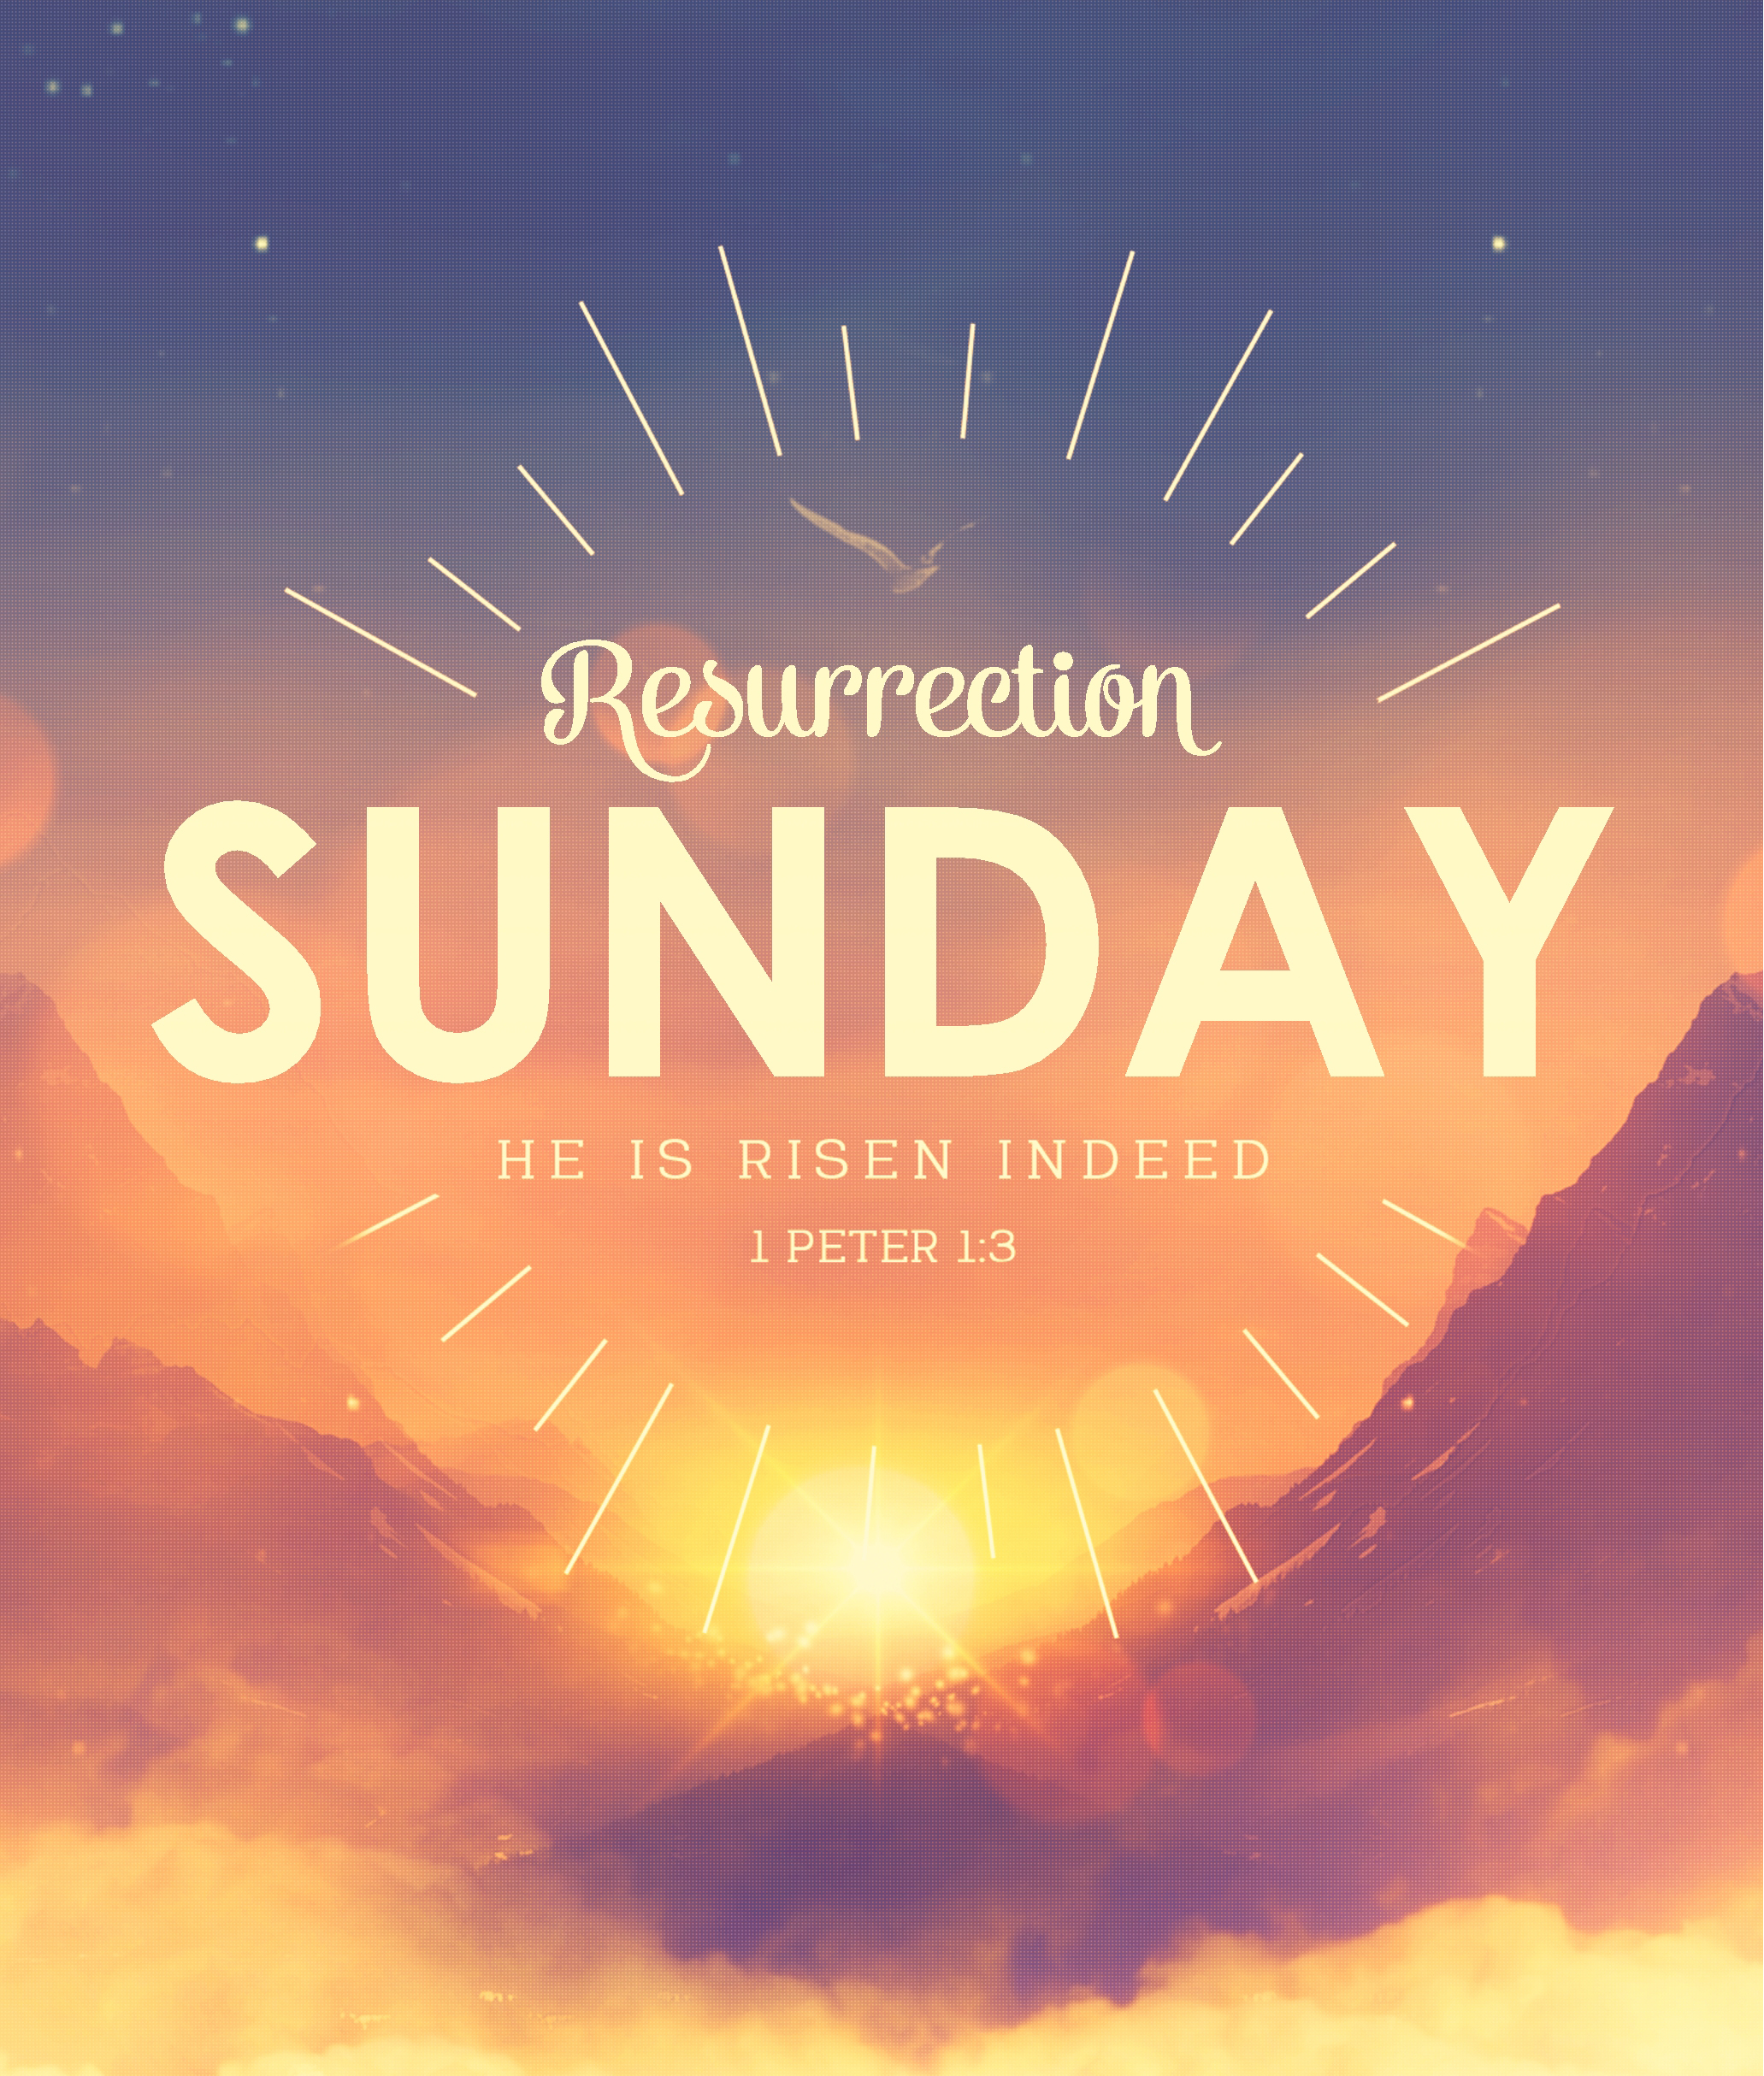 Easter Sunday: The Final Word